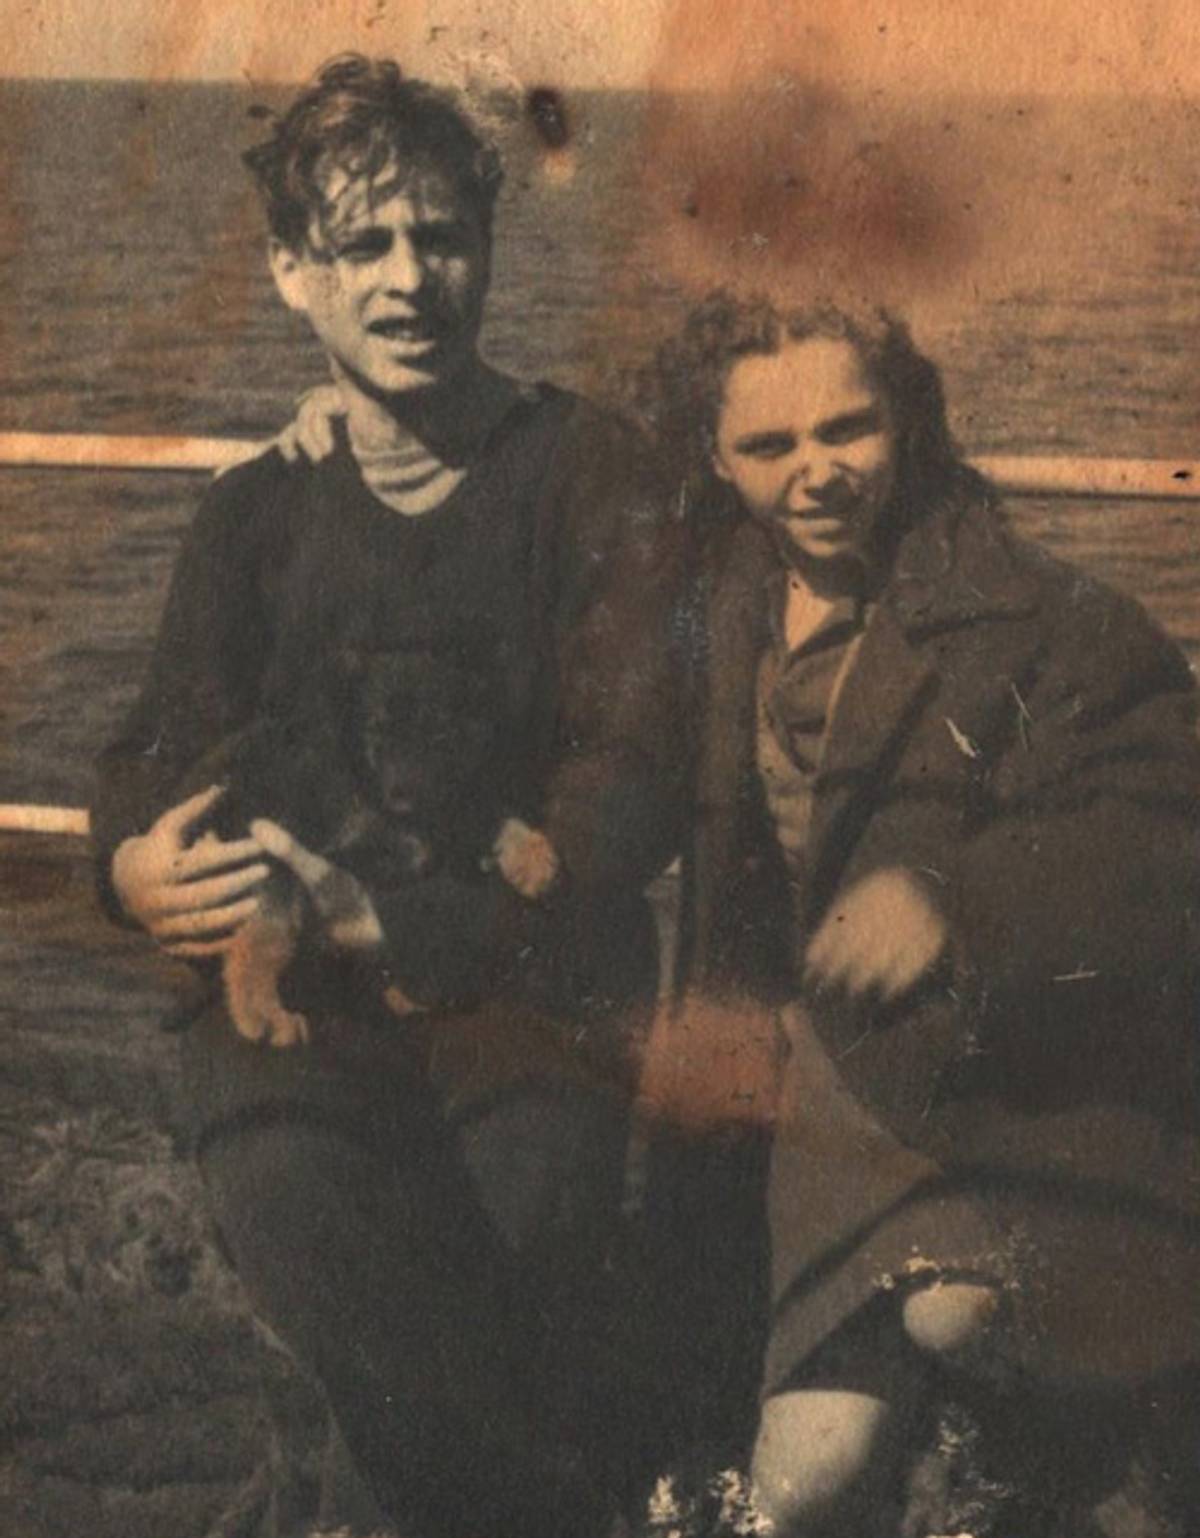 Moni Sana and his sister Cecile on the boat to Israel, 1949 (Photo courtesy Carol Ritter Elbaz)